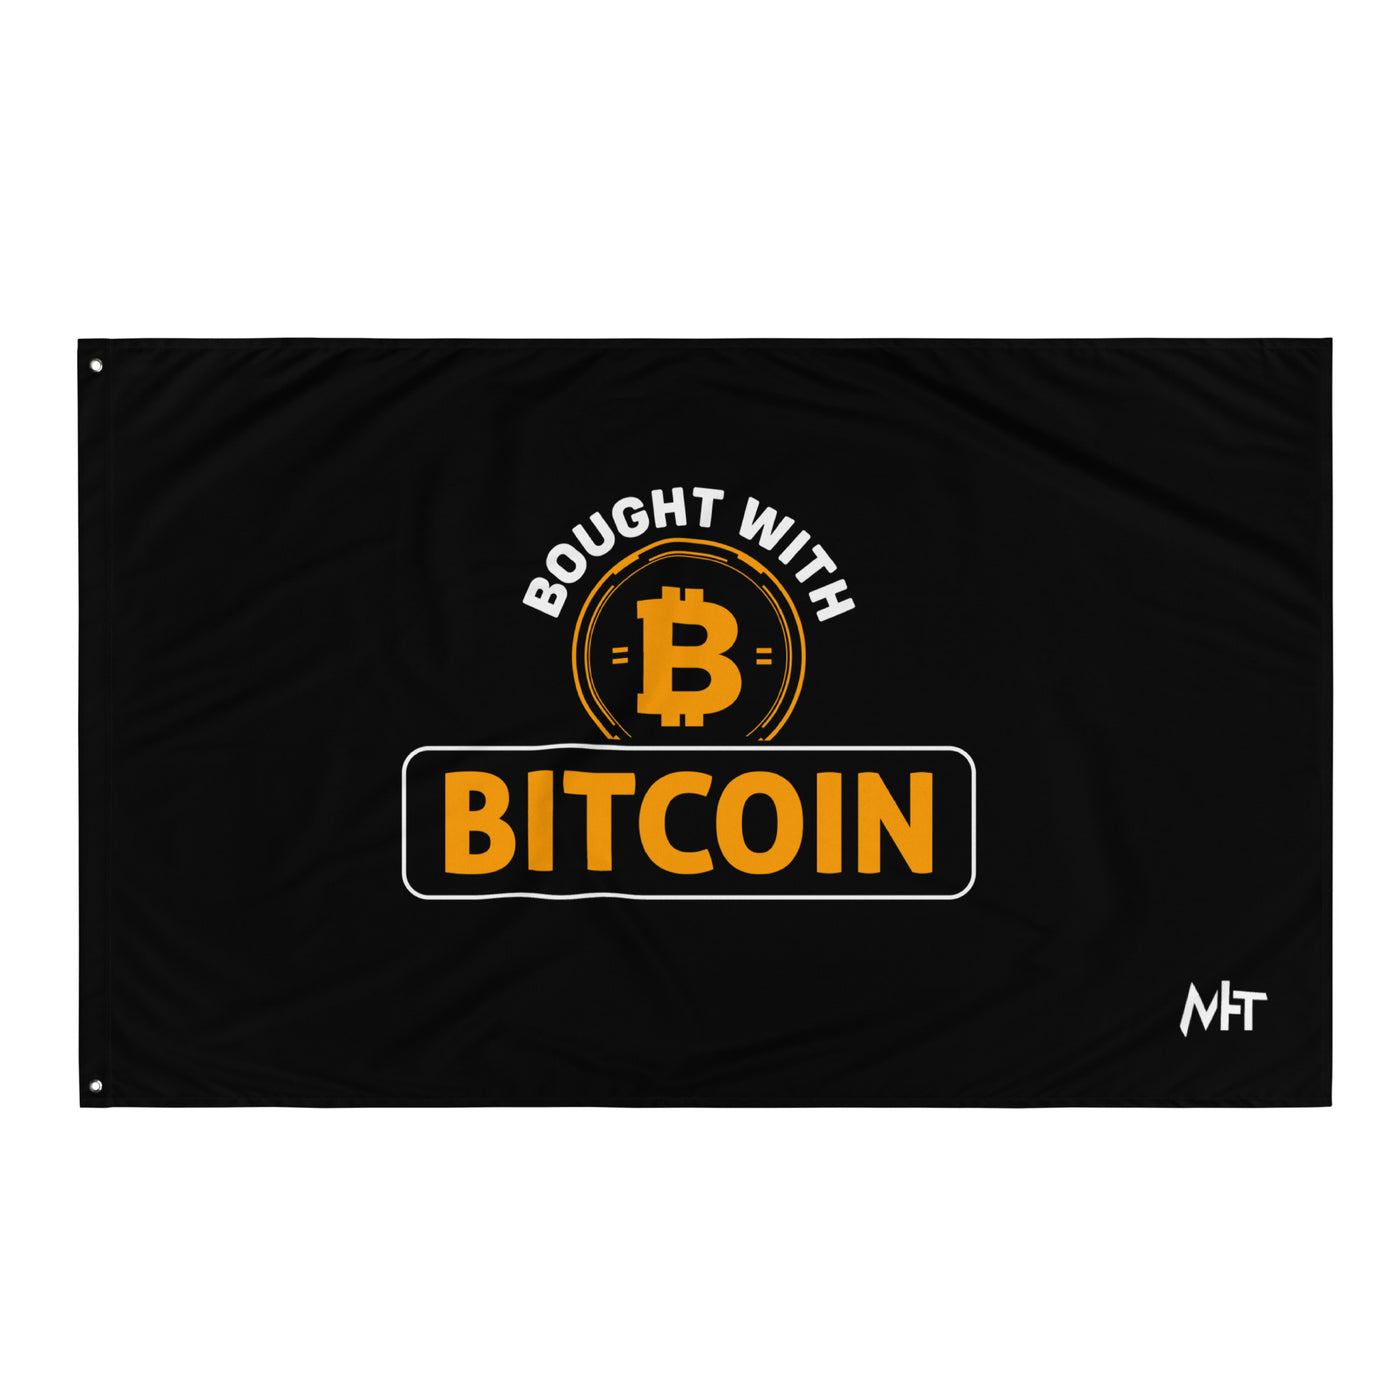 Bought with Bitcoin - Flag